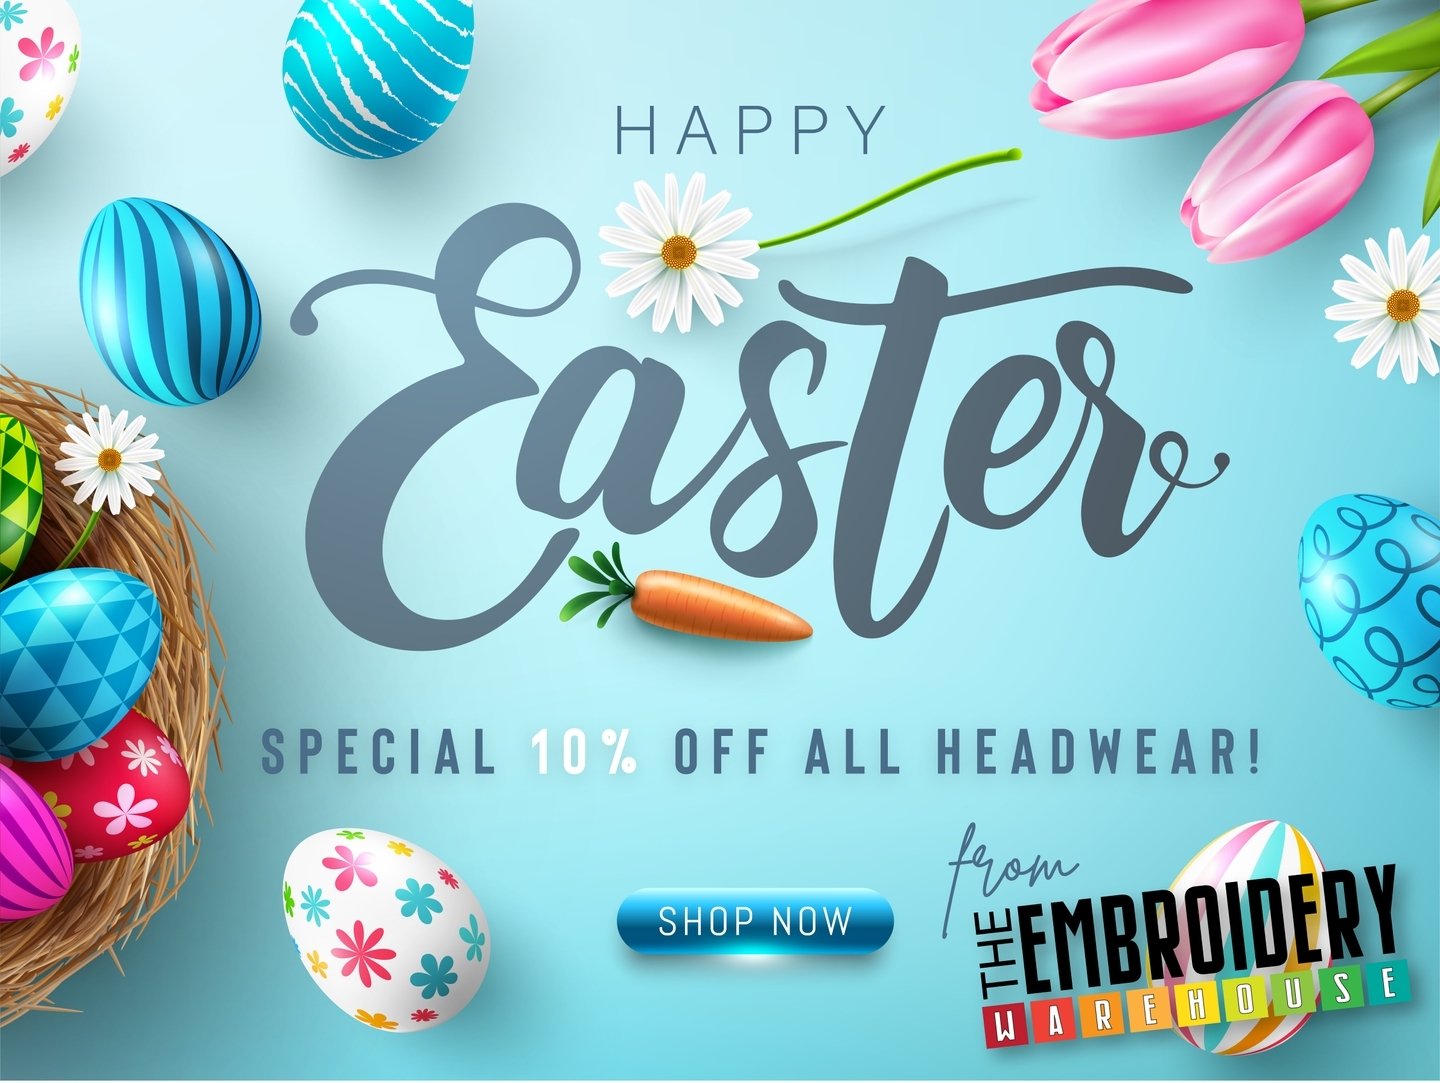 Happy Good Friday, uniform aficionados! 🐰✨ Hop into our Easter sale and score 10% off all headwear on our website. From caps to wide-brim hats, we've got the perfect accessory to top off your professional look. Don't miss out on this egg-citing deal